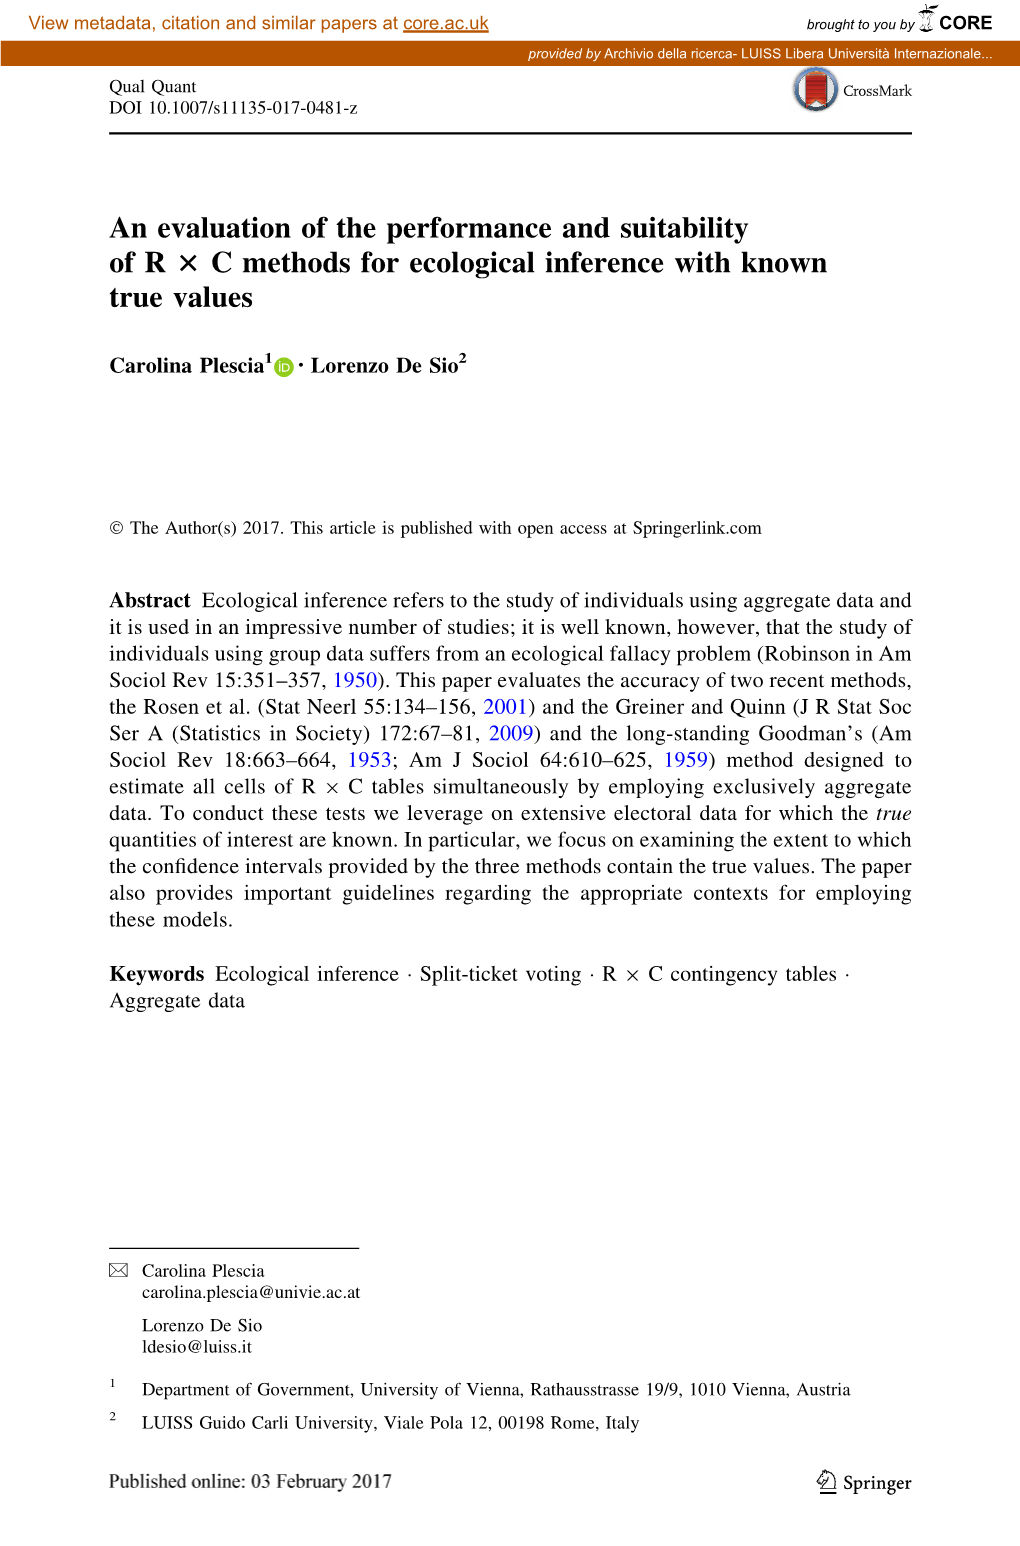 An Evaluation of the Performance and Suitability of R × C Methods For